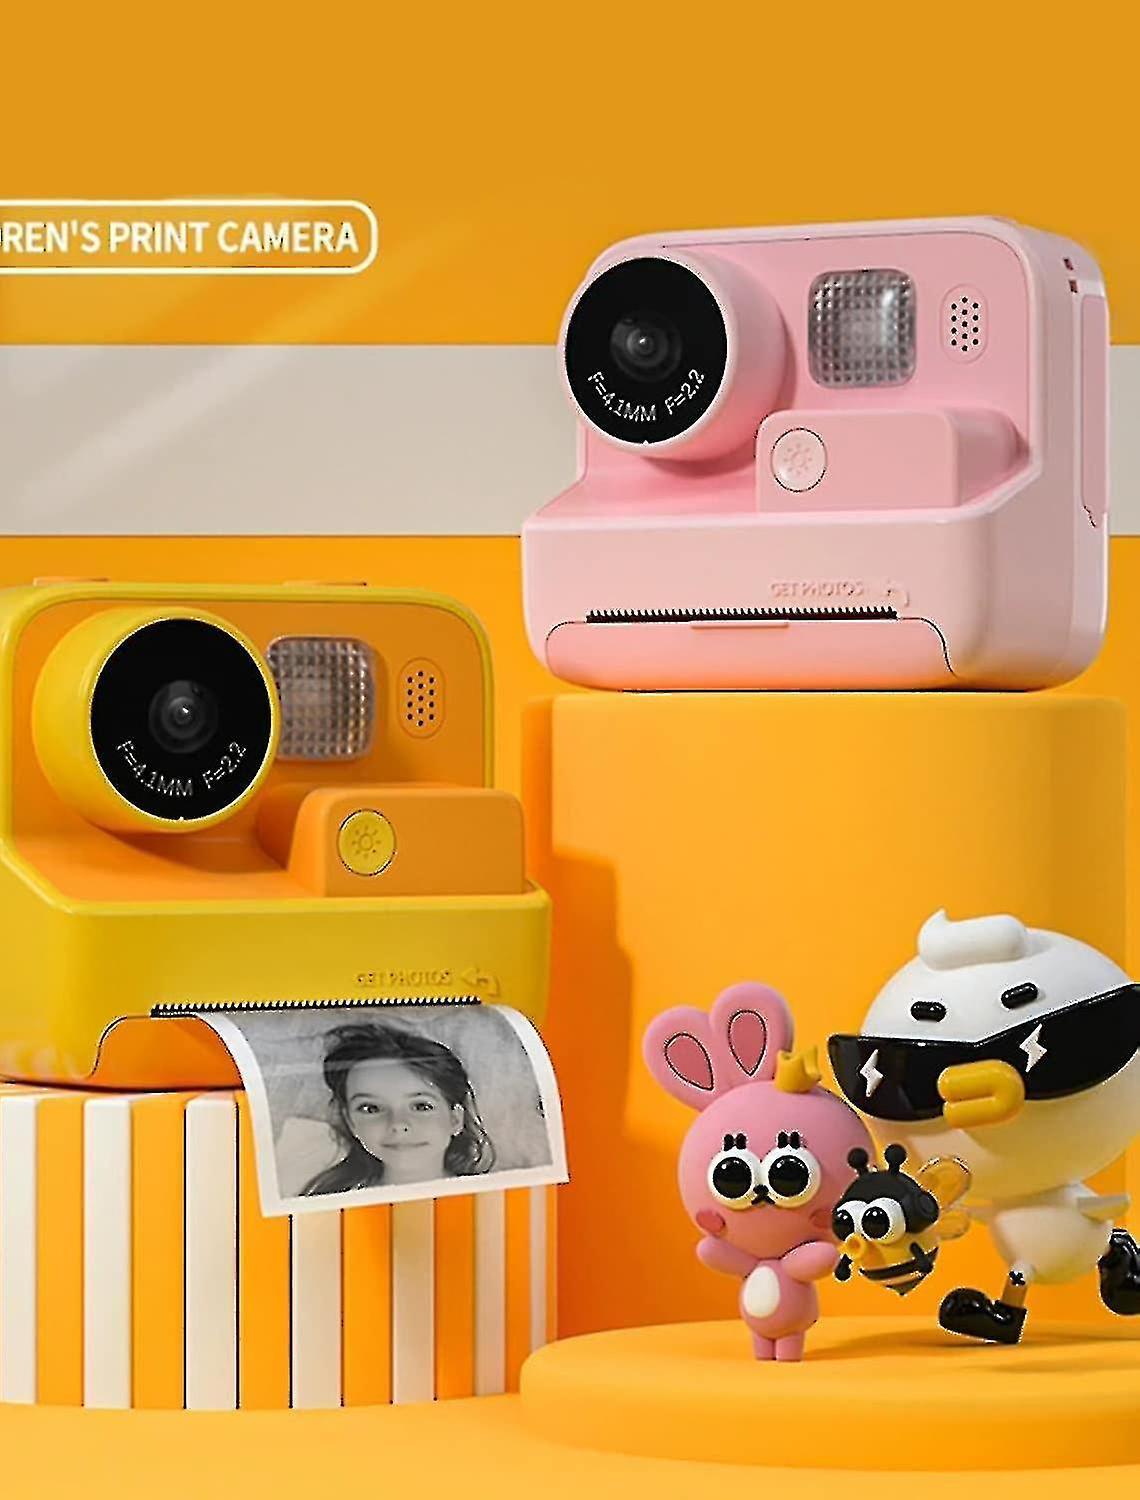 Kids Instant Print Camera Thermal Printing Camera Toy With 3 Rolls Print Paper Video Photo For Children Boy Girls Gift